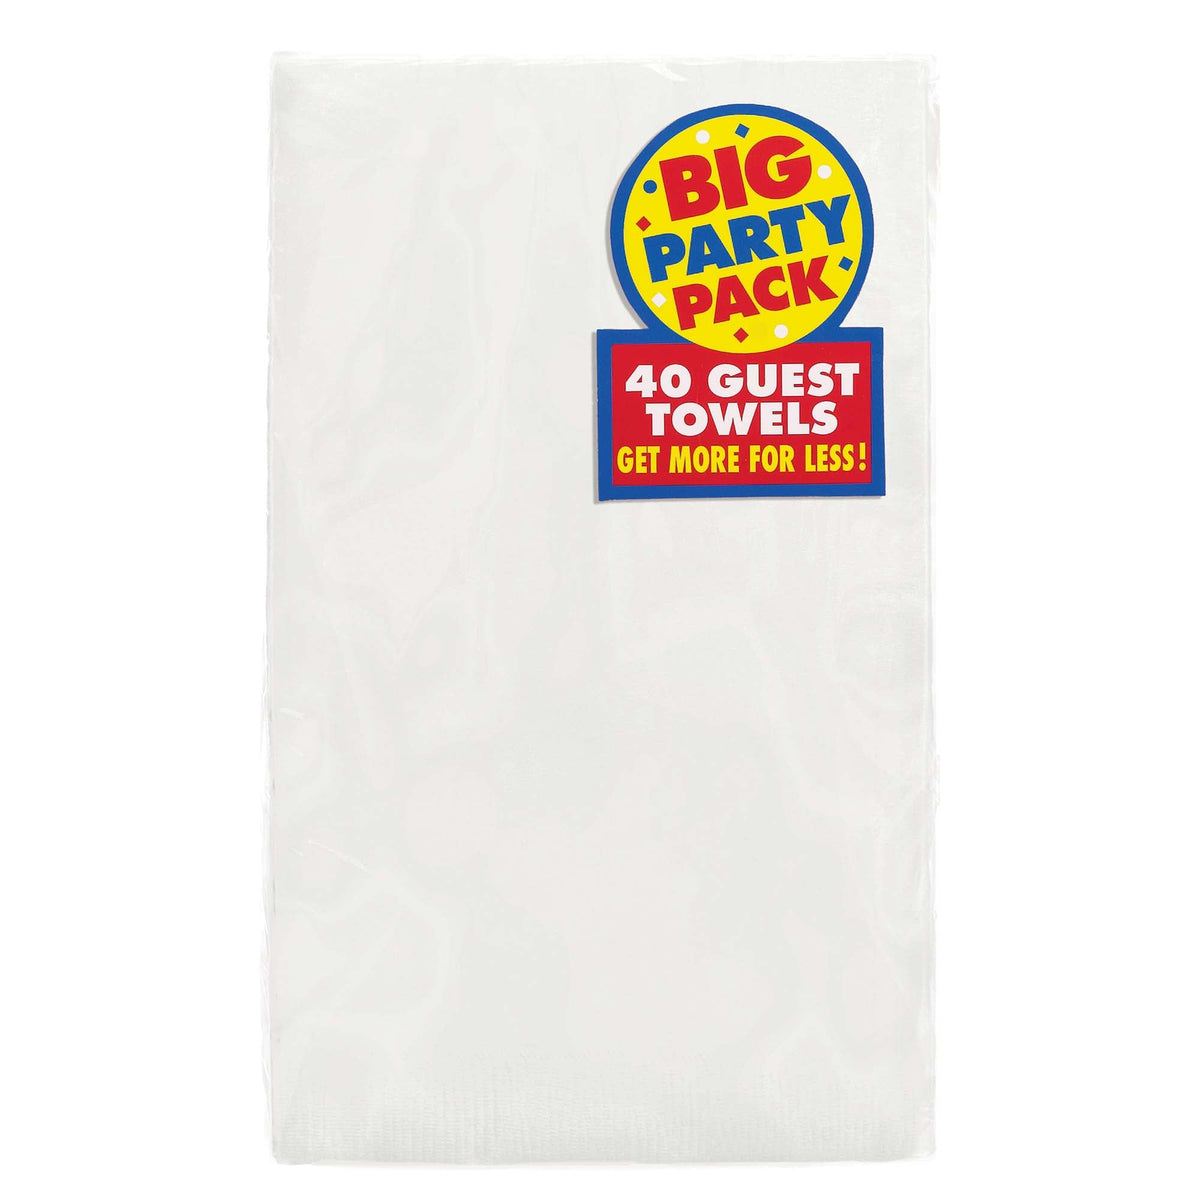 Frosty White 2-Ply Guest Towels, 40 count